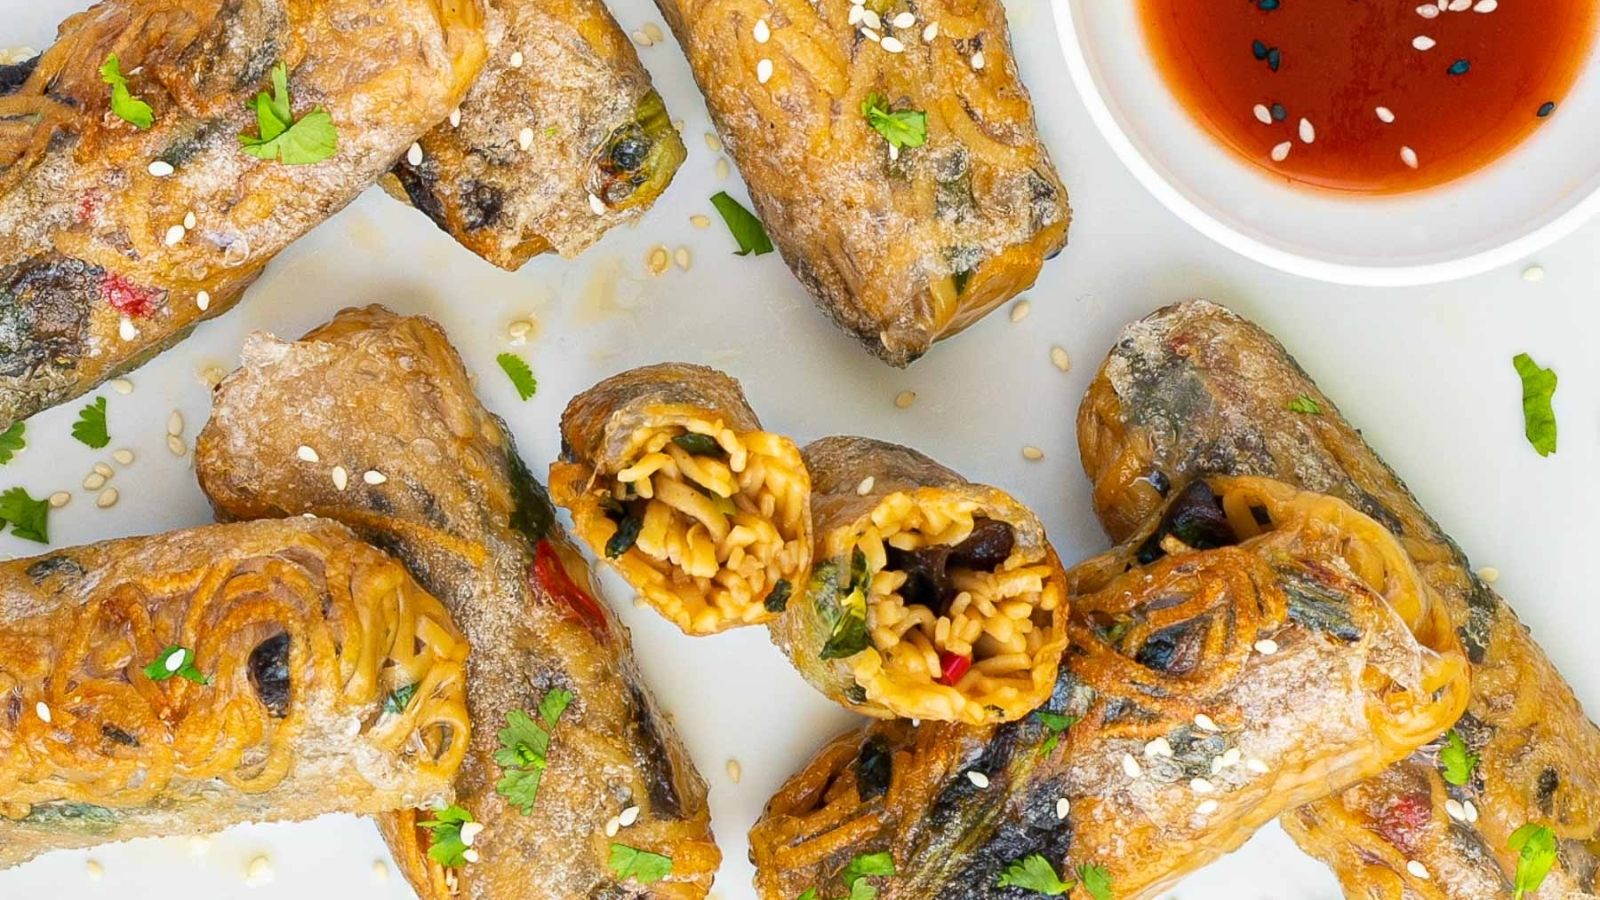 <p>Rolled and ready in just under 30 minutes, these ramen spring rolls are sure to be a scrumptious addition to your next dinner party. Serve it up as an appetizer or snack and let your guests enjoy the savory flavors of bok choy, scallion, and wood ear mushroom, cooked in a spicy blend of sriracha and soy sauce!</p><p><strong>Recipe:</strong> <a href="https://mypureplants.com/ramen-spring-rolls/"><strong>ramen spring rolls</strong></a></p>